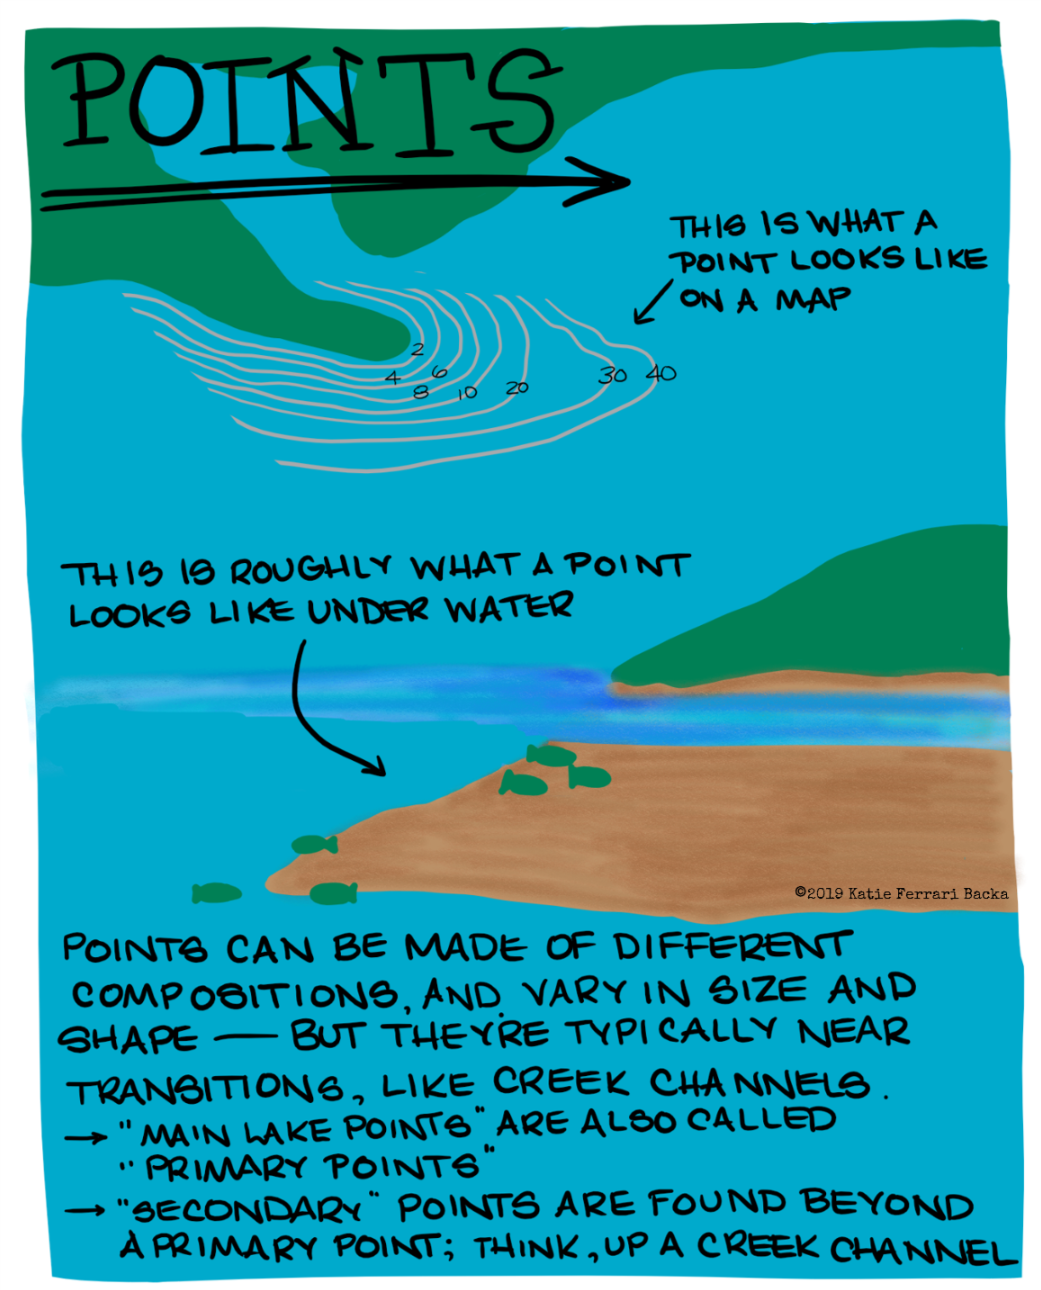 Written script around drawings of points: This is what a point looks like on a map. This is roughly what a point looks like under water.  Points can be made of different compositions, and very in size and shape - but they're typically near transitions, like creek channels.  Main lake points are also called primary points.  Secondary points are found beyond a primary point; think, up a creek channel